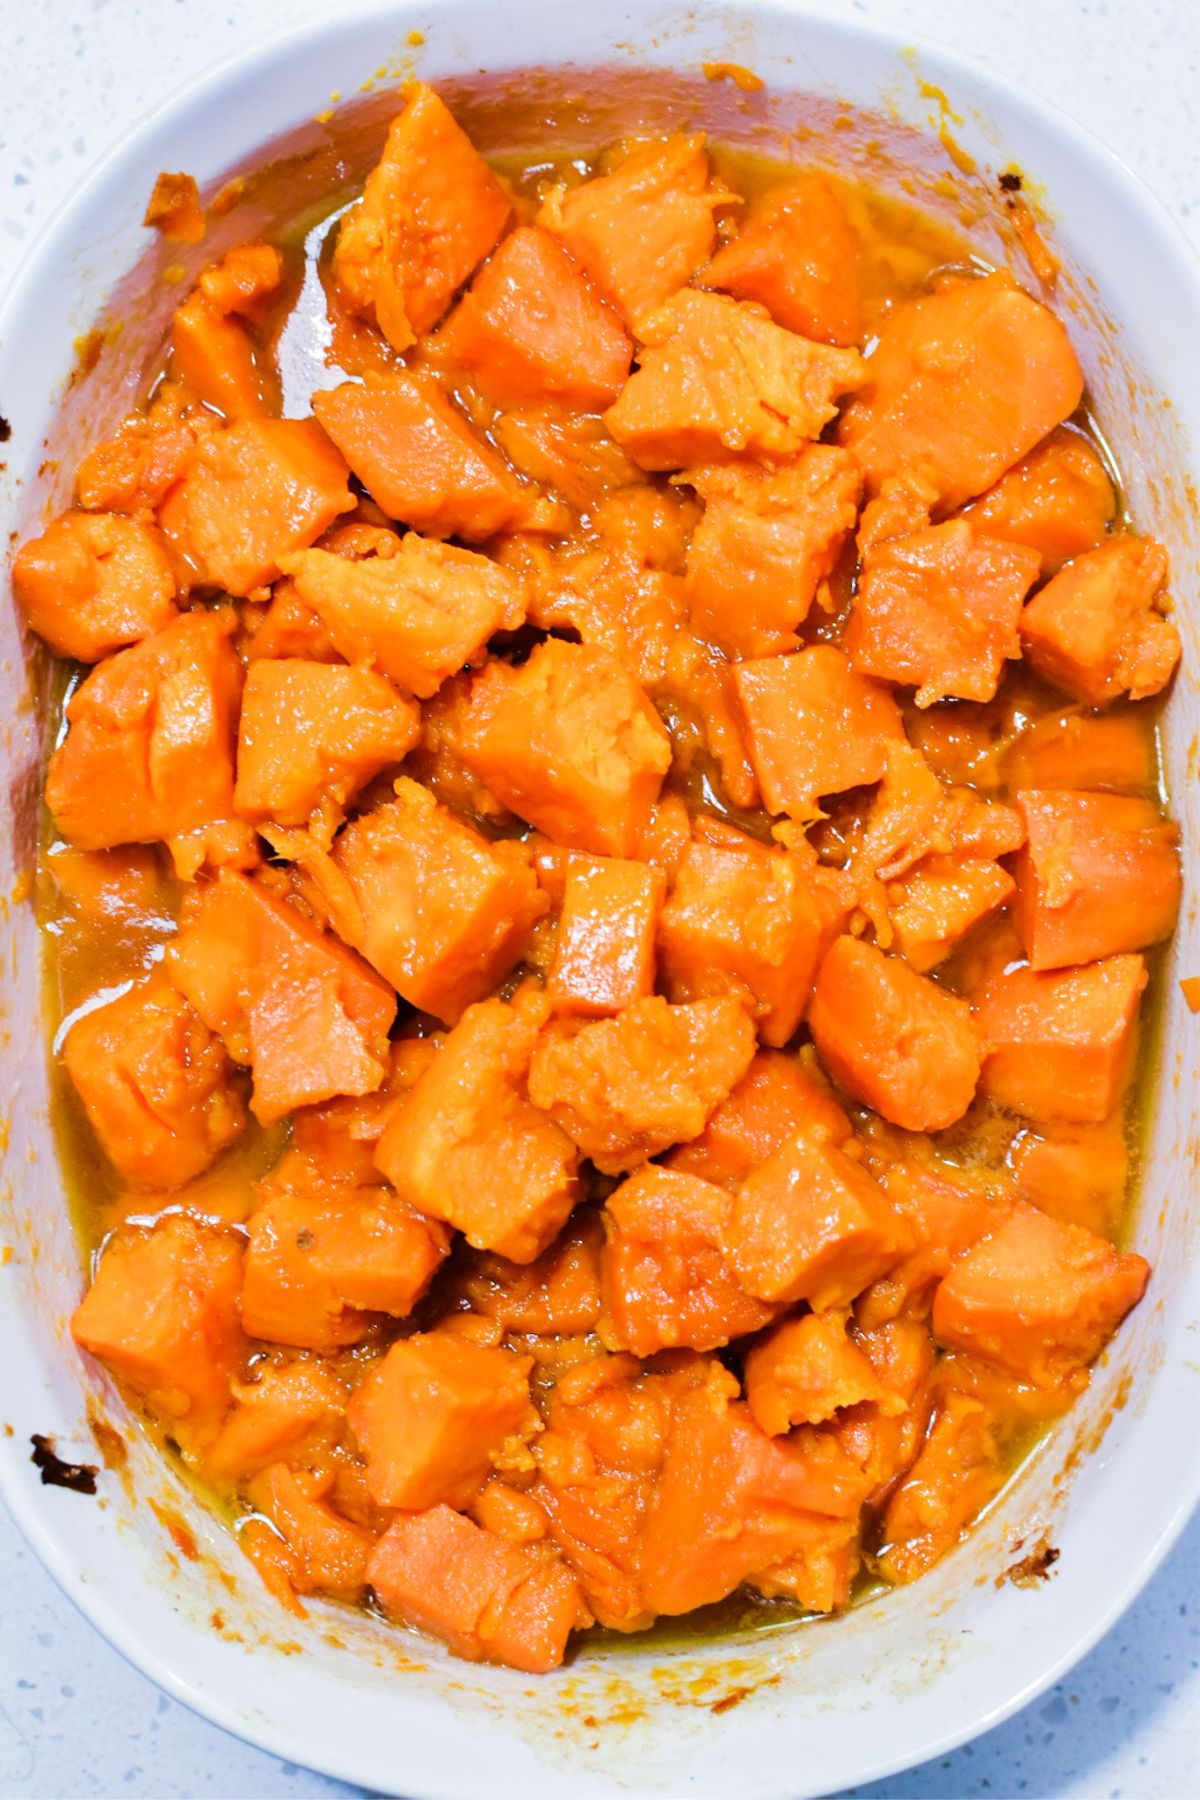 Cooked sweet potatoes in a white casserole dish.